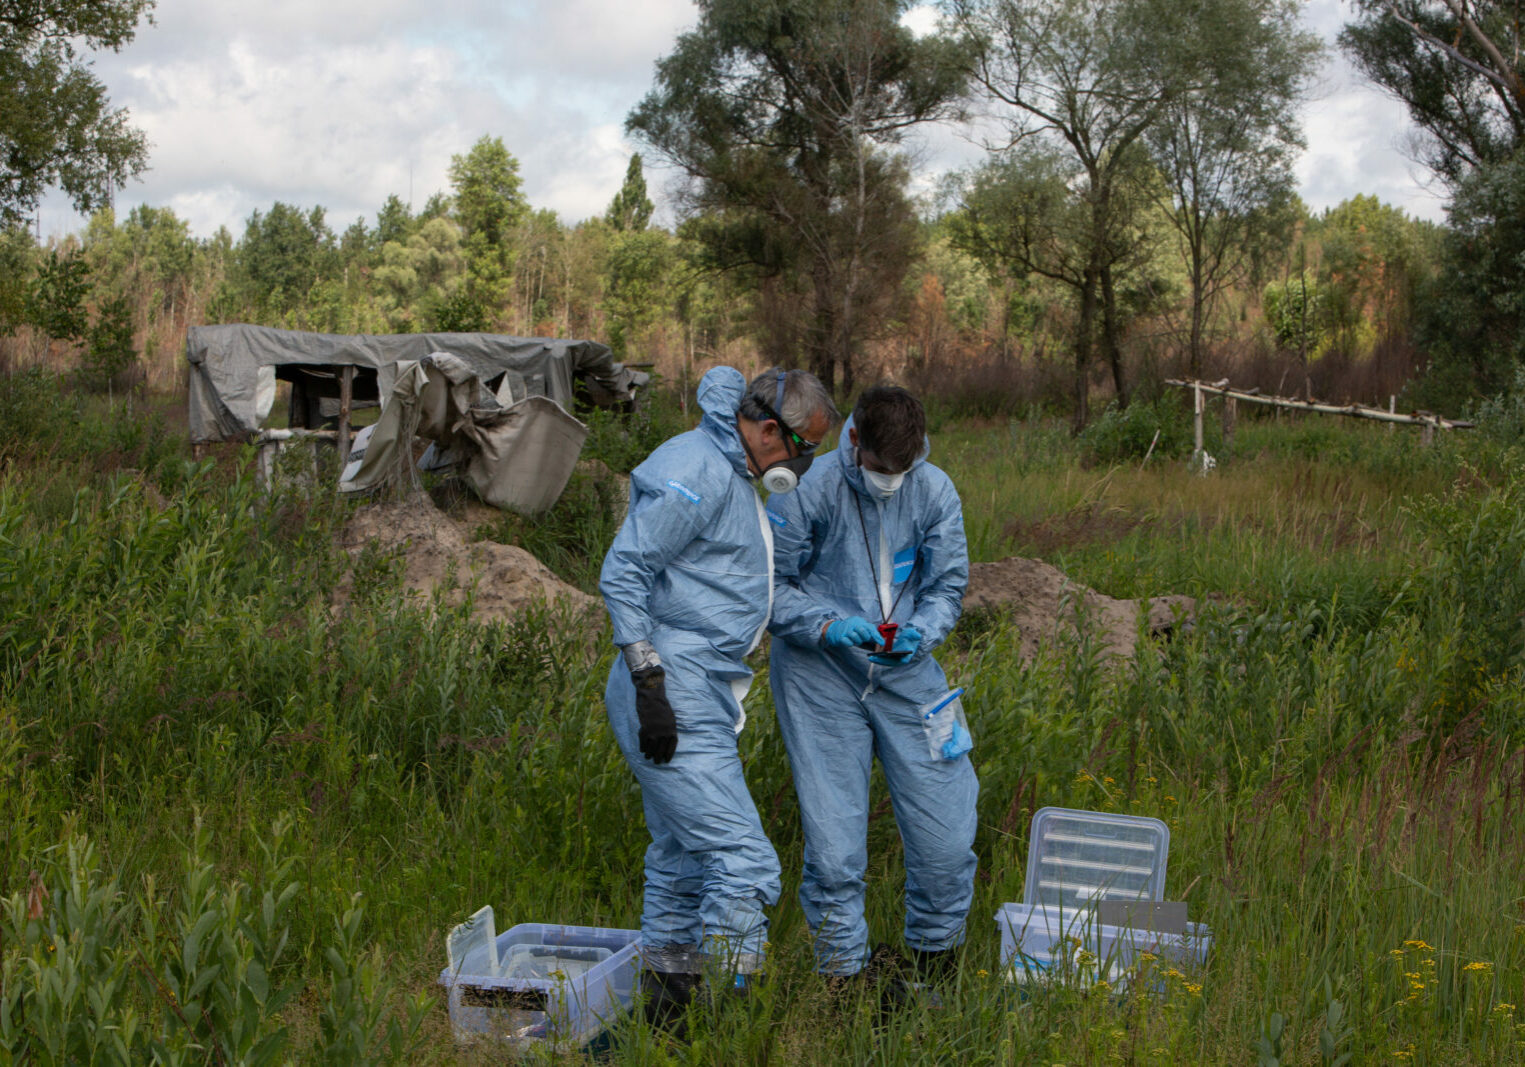 Jan Vande Putte (left) and Mathieu Soete, Radiation protection advisors from Greenpeace Belgium, at work taking samples of radioactive earth from the area where the Russian military dug trenches and built defensive structures in the March 2022 occupation.

The Greenpeace Chornobyl investigation team in the Chornobyl exclusion zone, working to extract earth samples to check for disturbed radiation in the area recently occupied by the Russian military, in Ukraine, 17 July 2022.